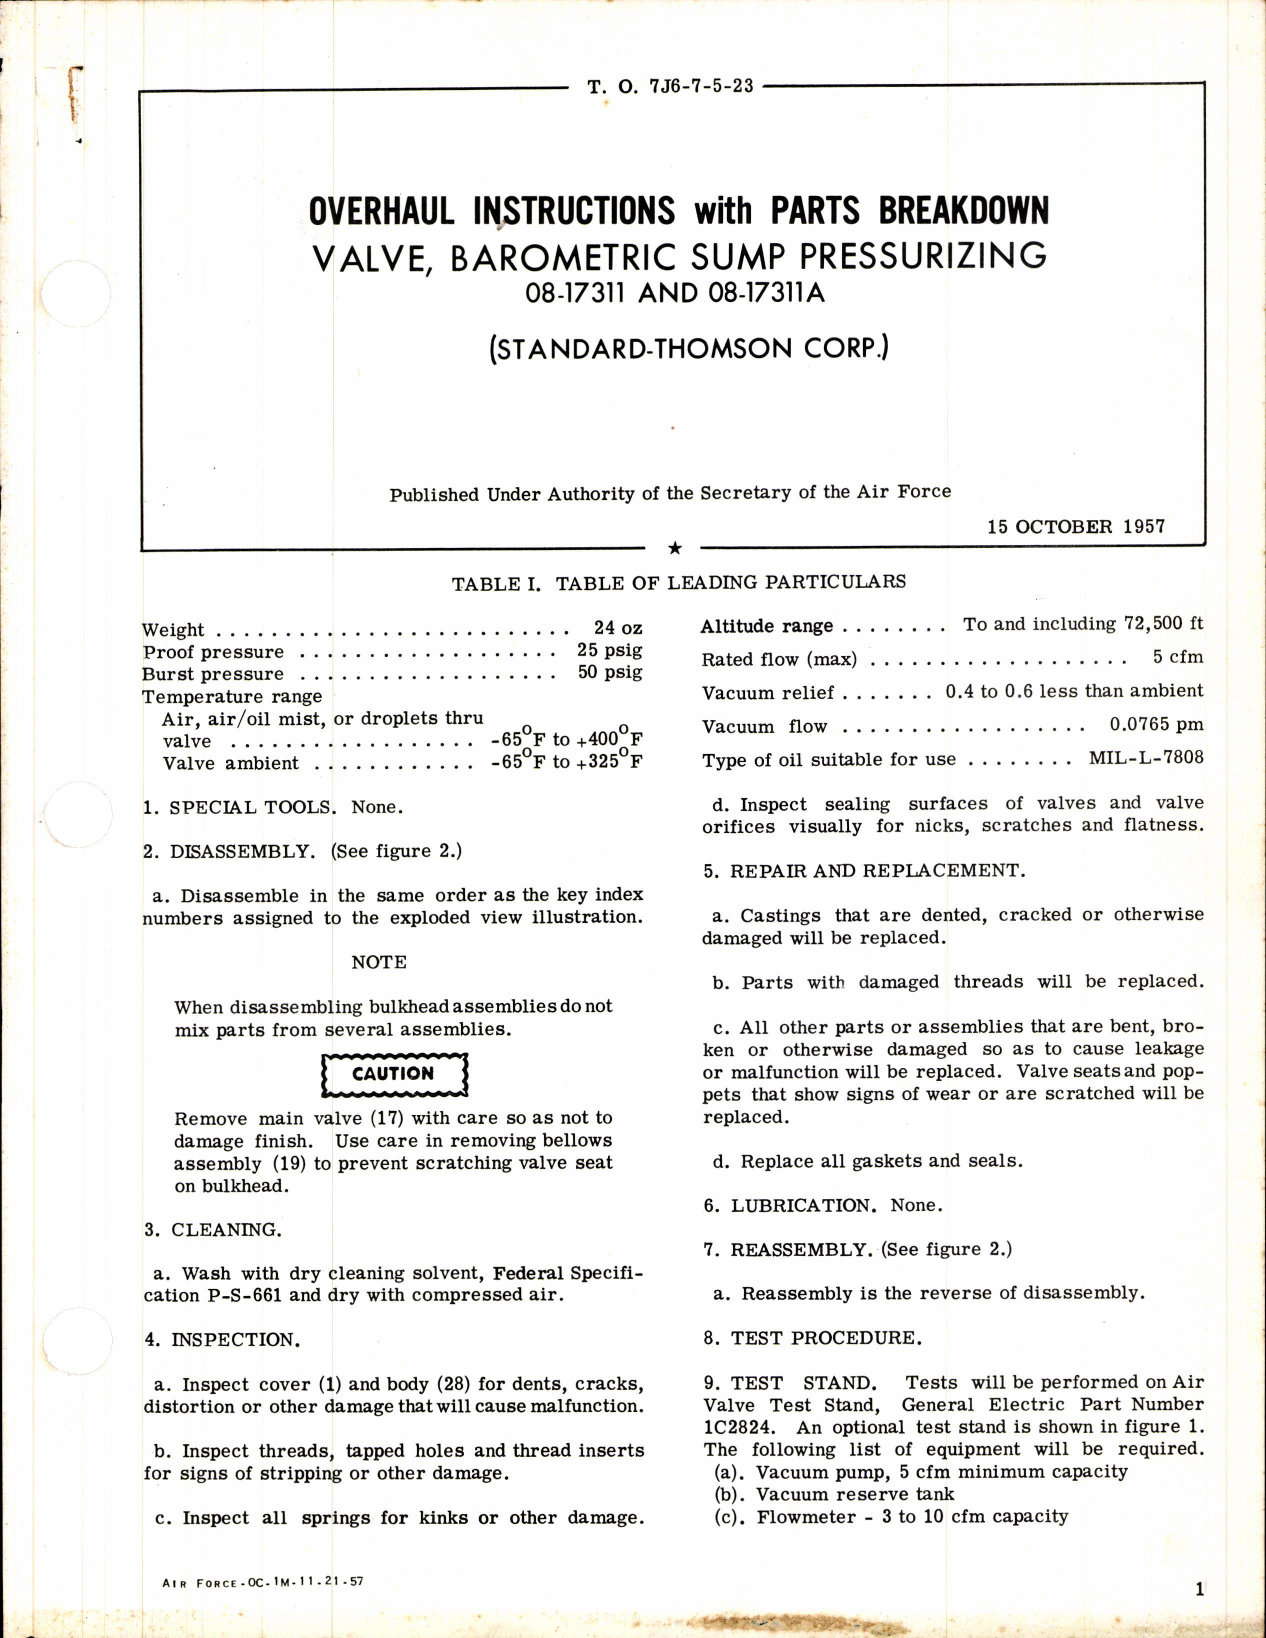 Sample page 1 from AirCorps Library document: Overhaul Instructions with Parts for Valve, Barometric Sump Pressurizing